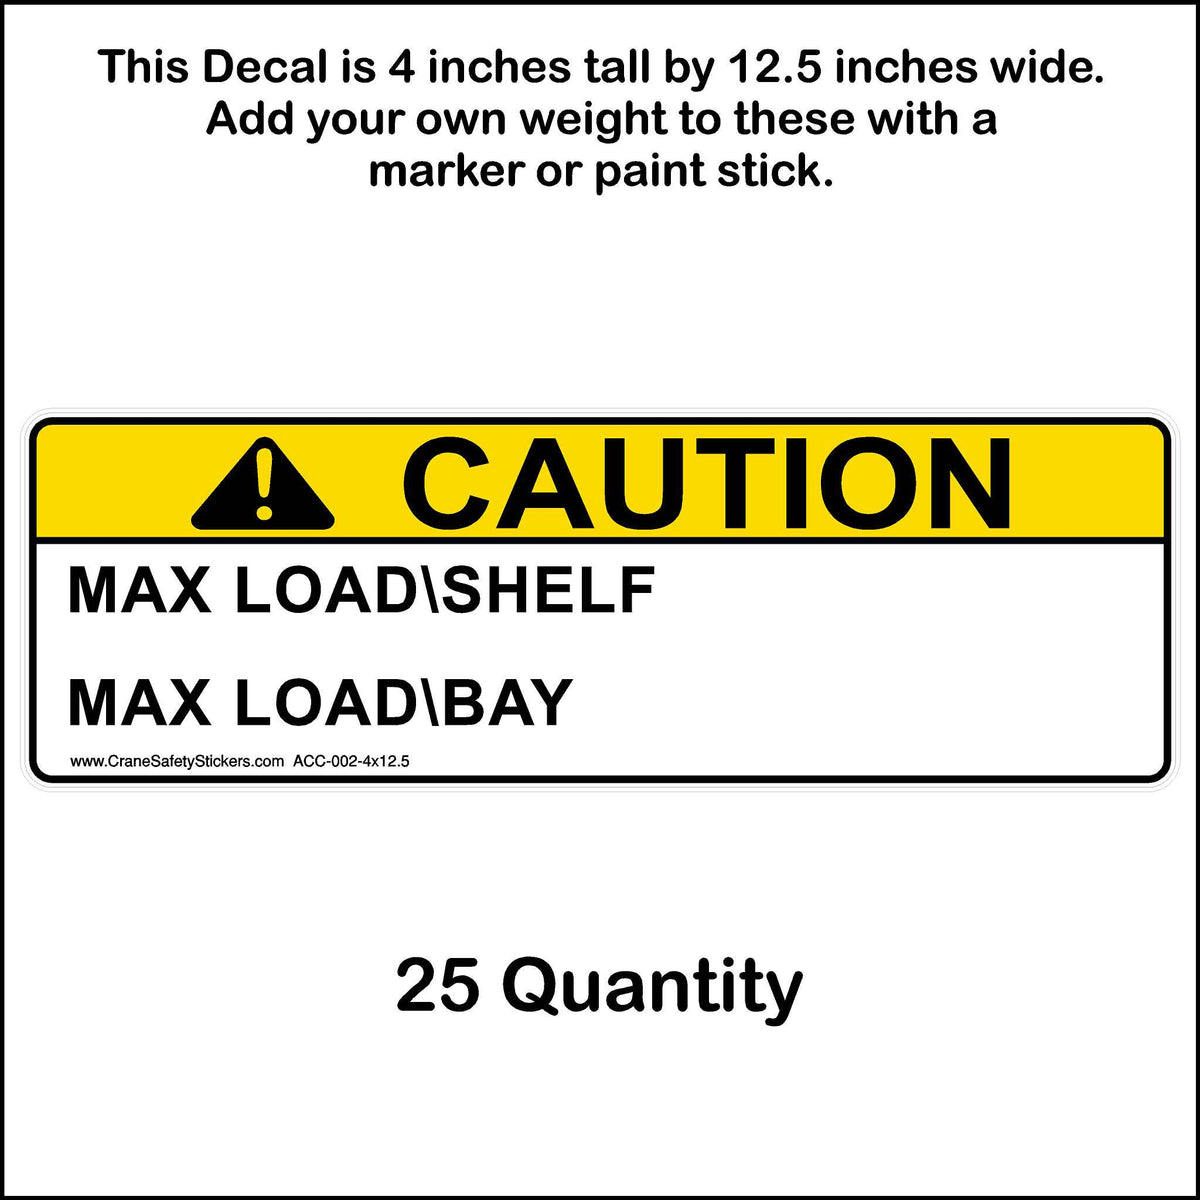 4 inch by 12.5 inch Max load shelf and max load bay sticker 25 quantity.